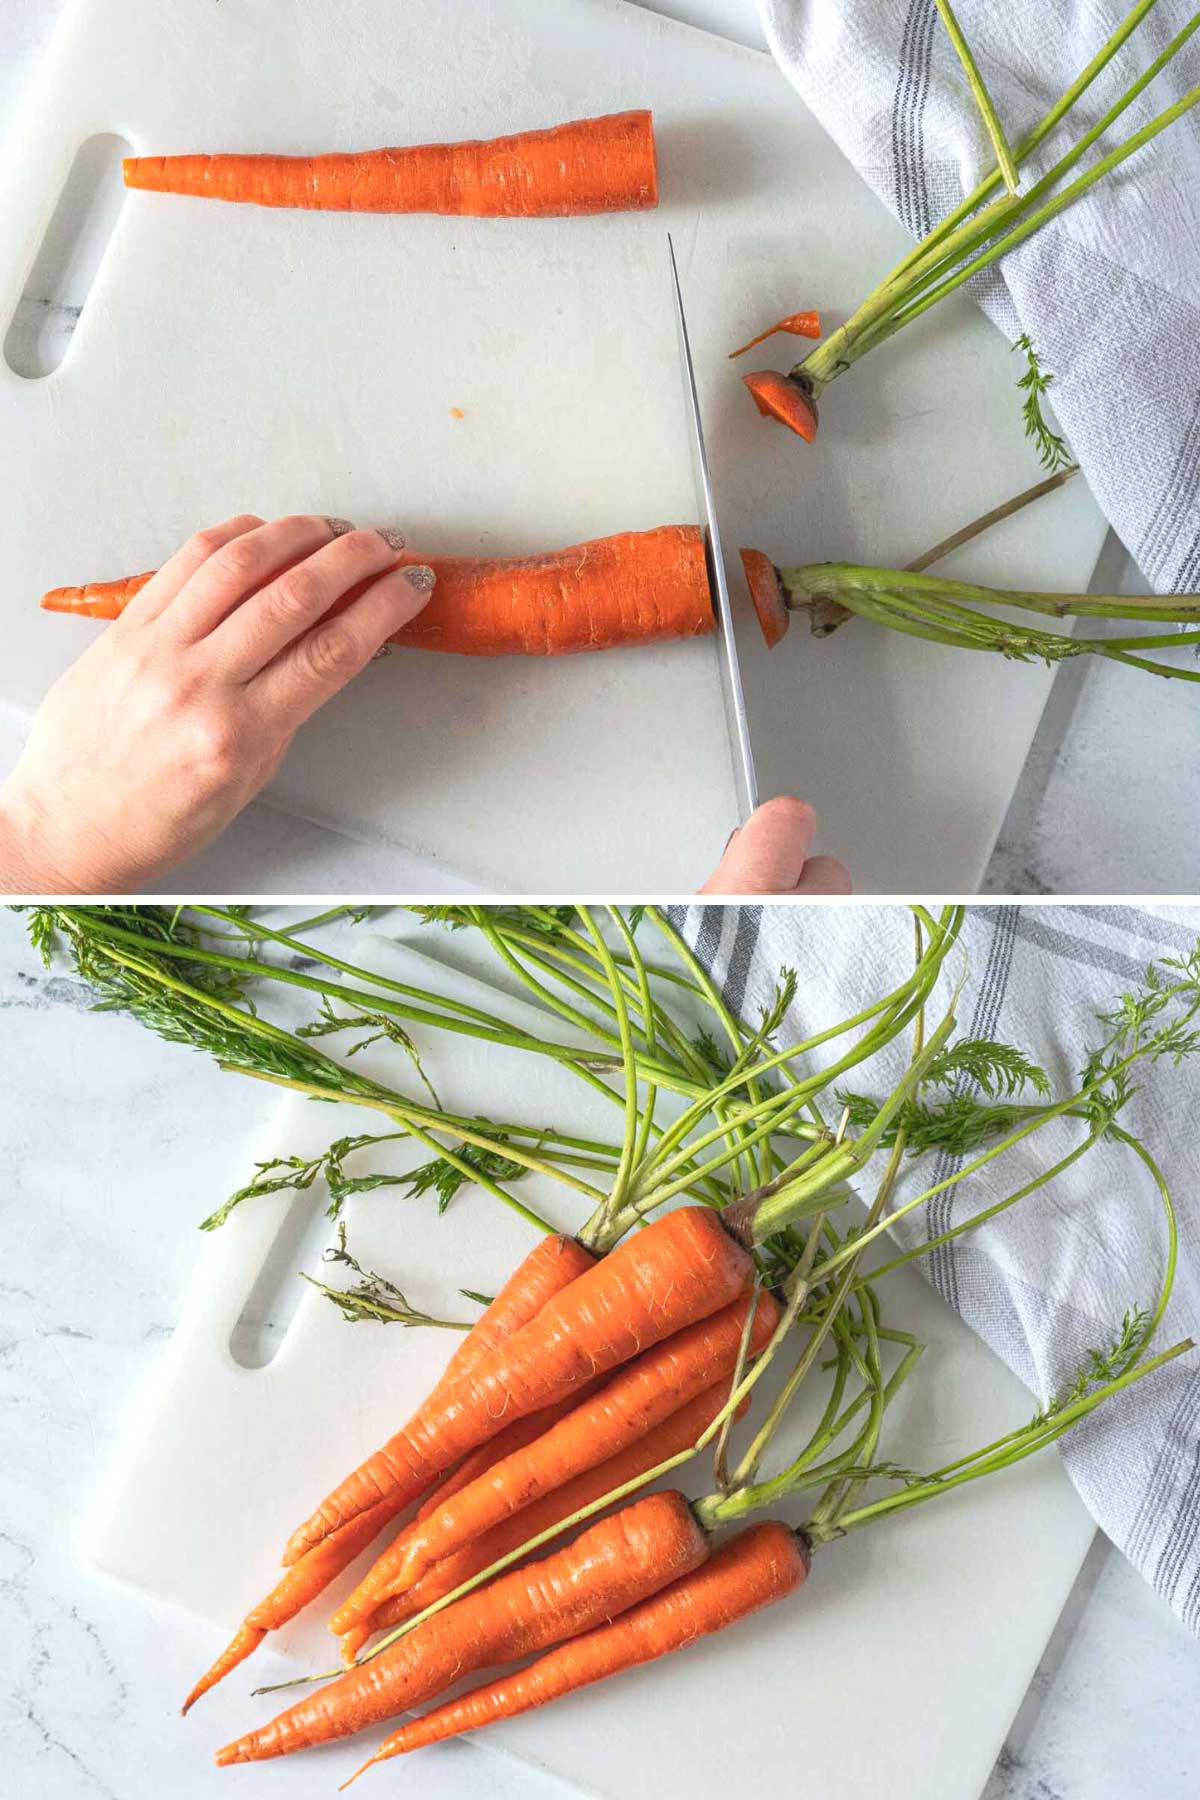 Trimming the top off of the carrots.